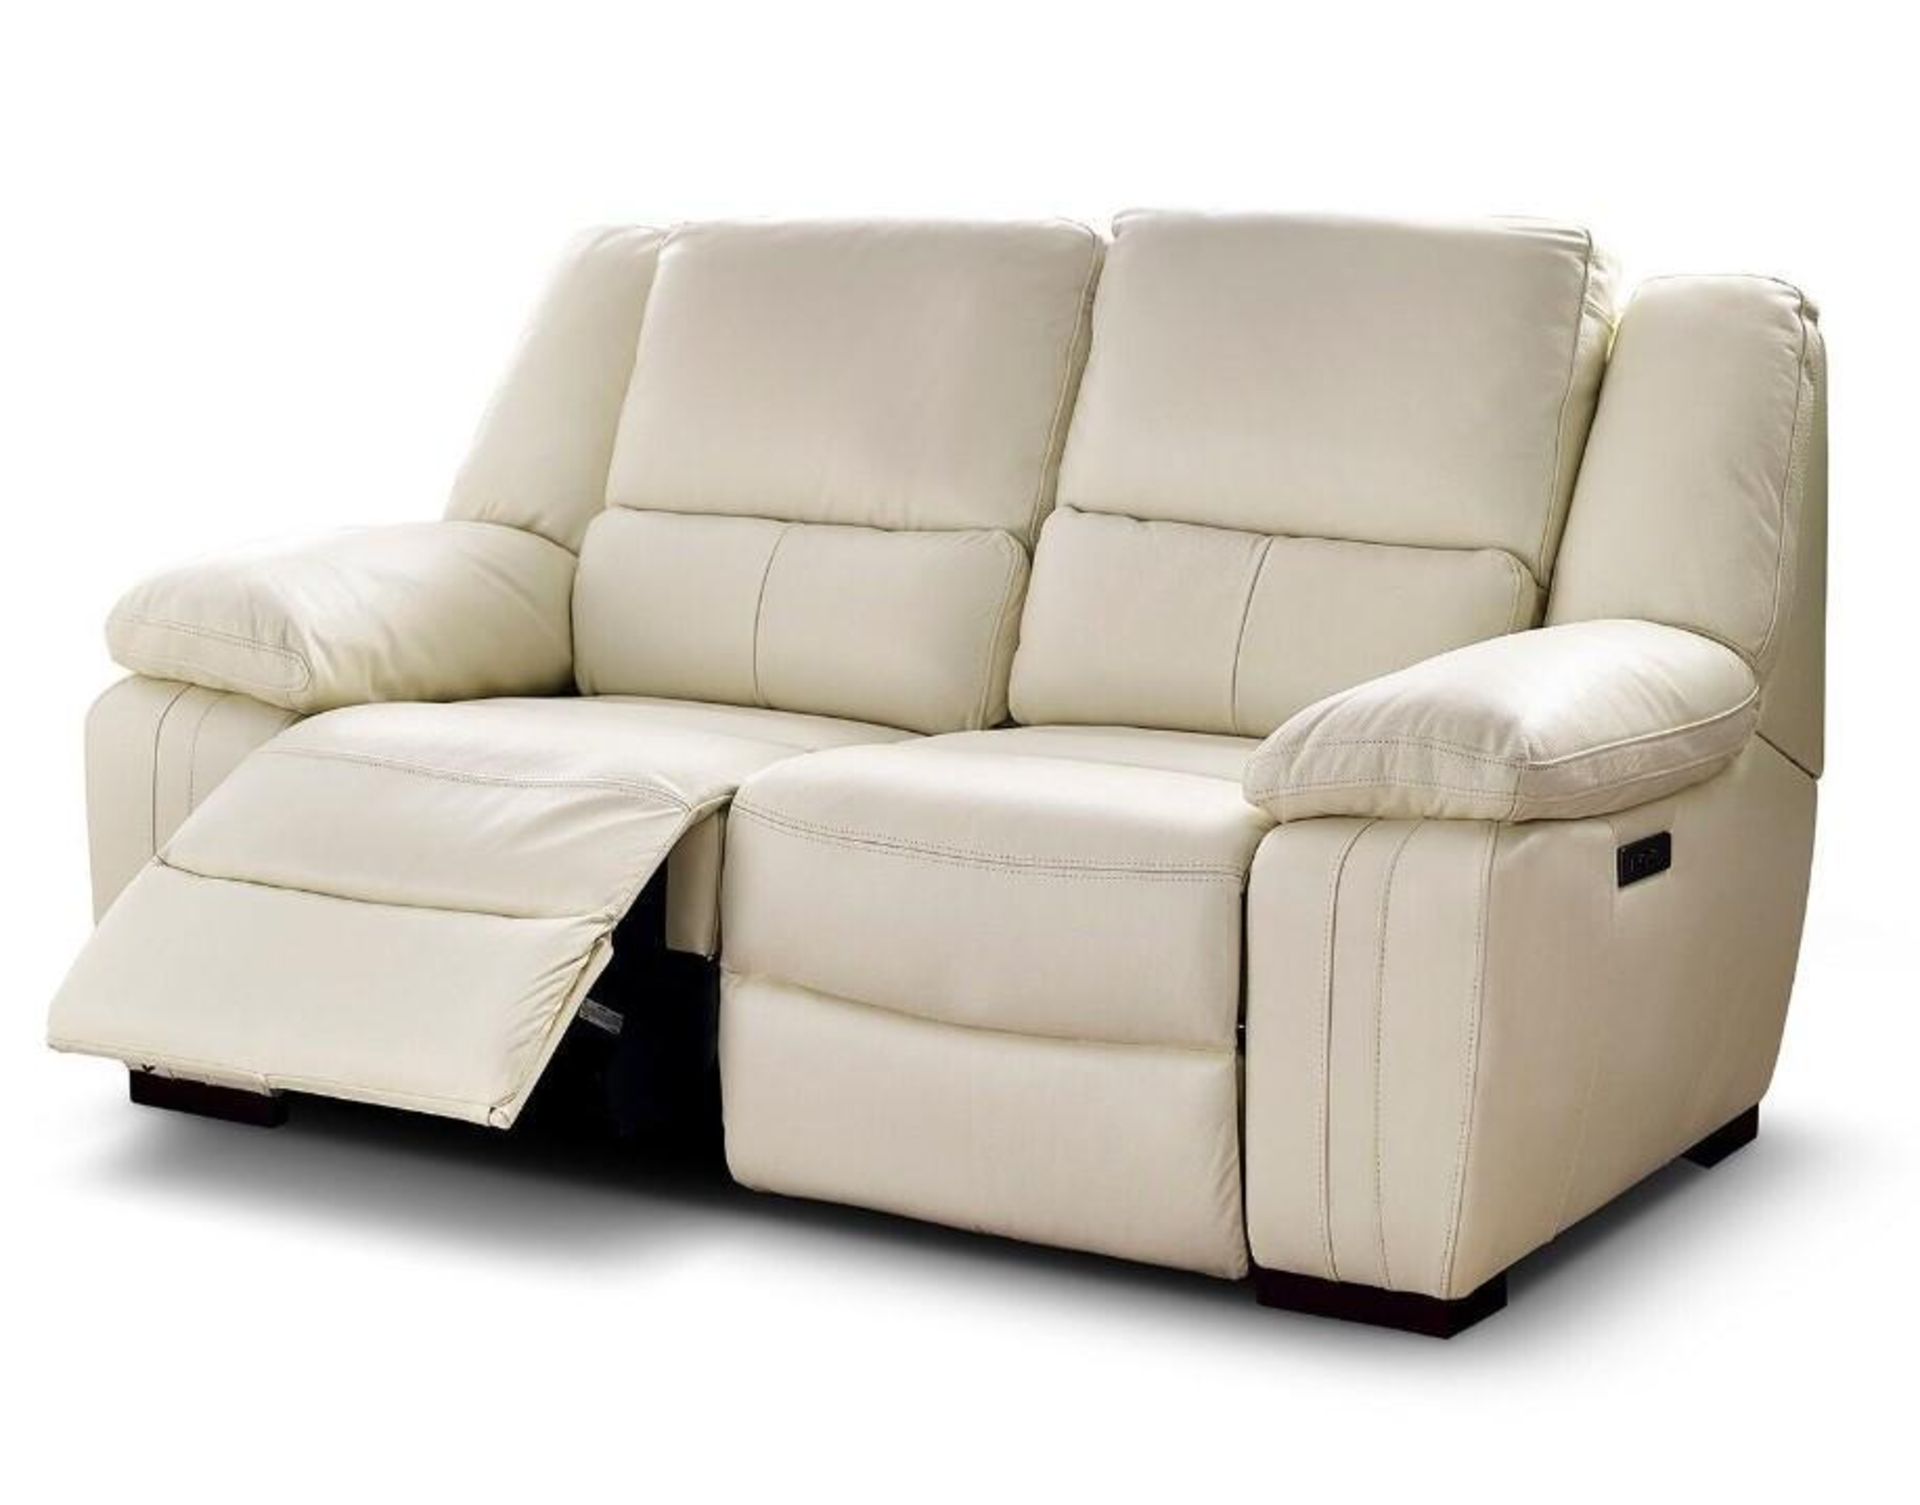 Brand new and boxed SCS Fallon 3 seater electric reclining sofa in Cream. - Bild 2 aus 7